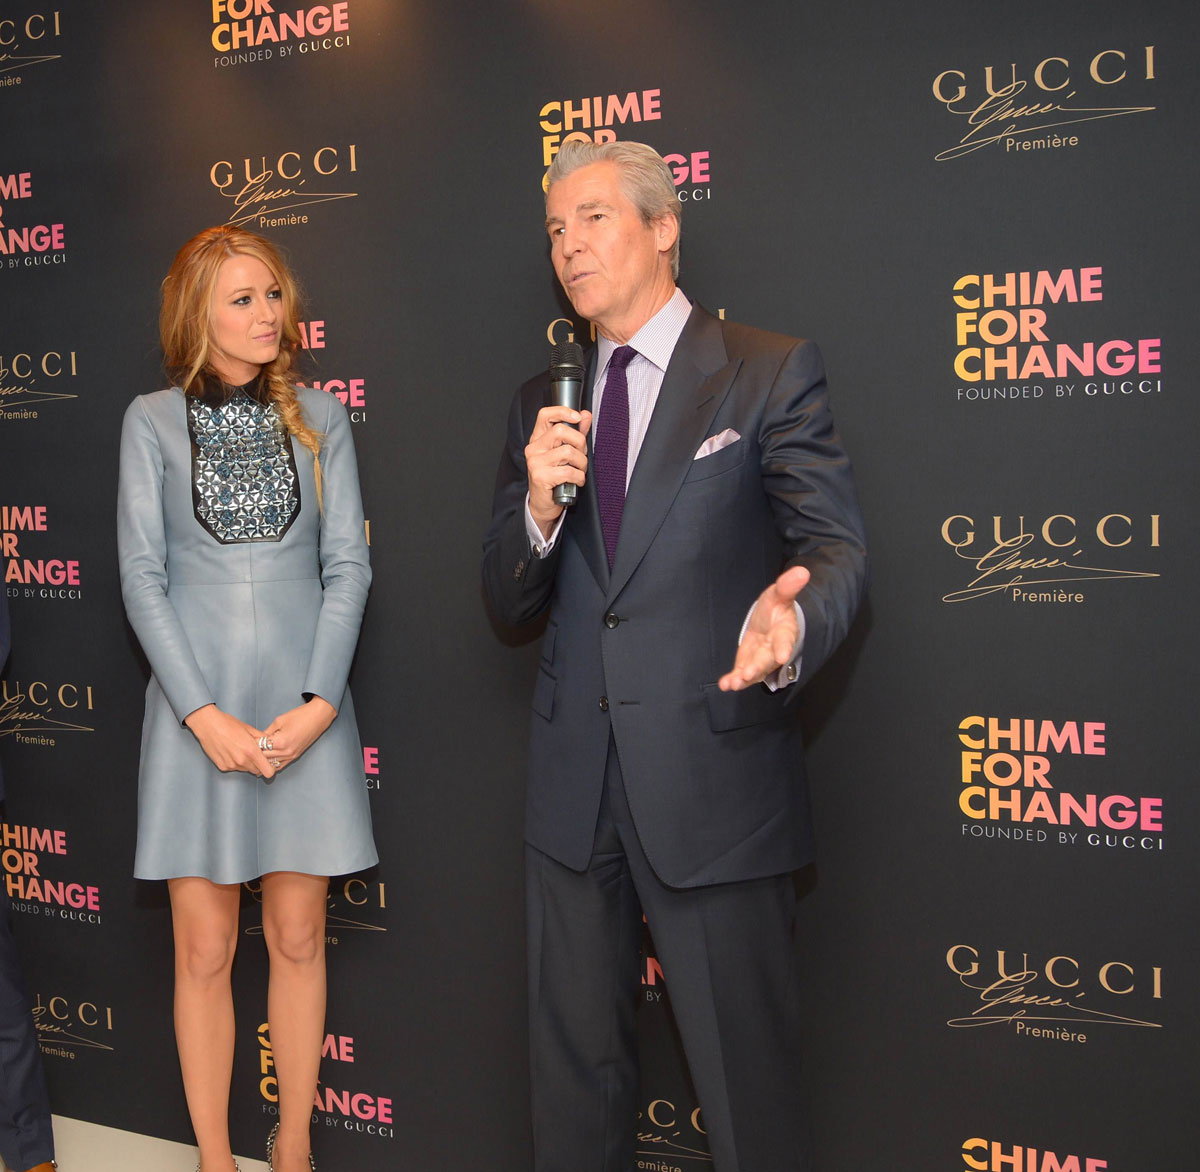 Blake Lively attends Gucci Parfums CHIME FOR CHANGE Launch Event